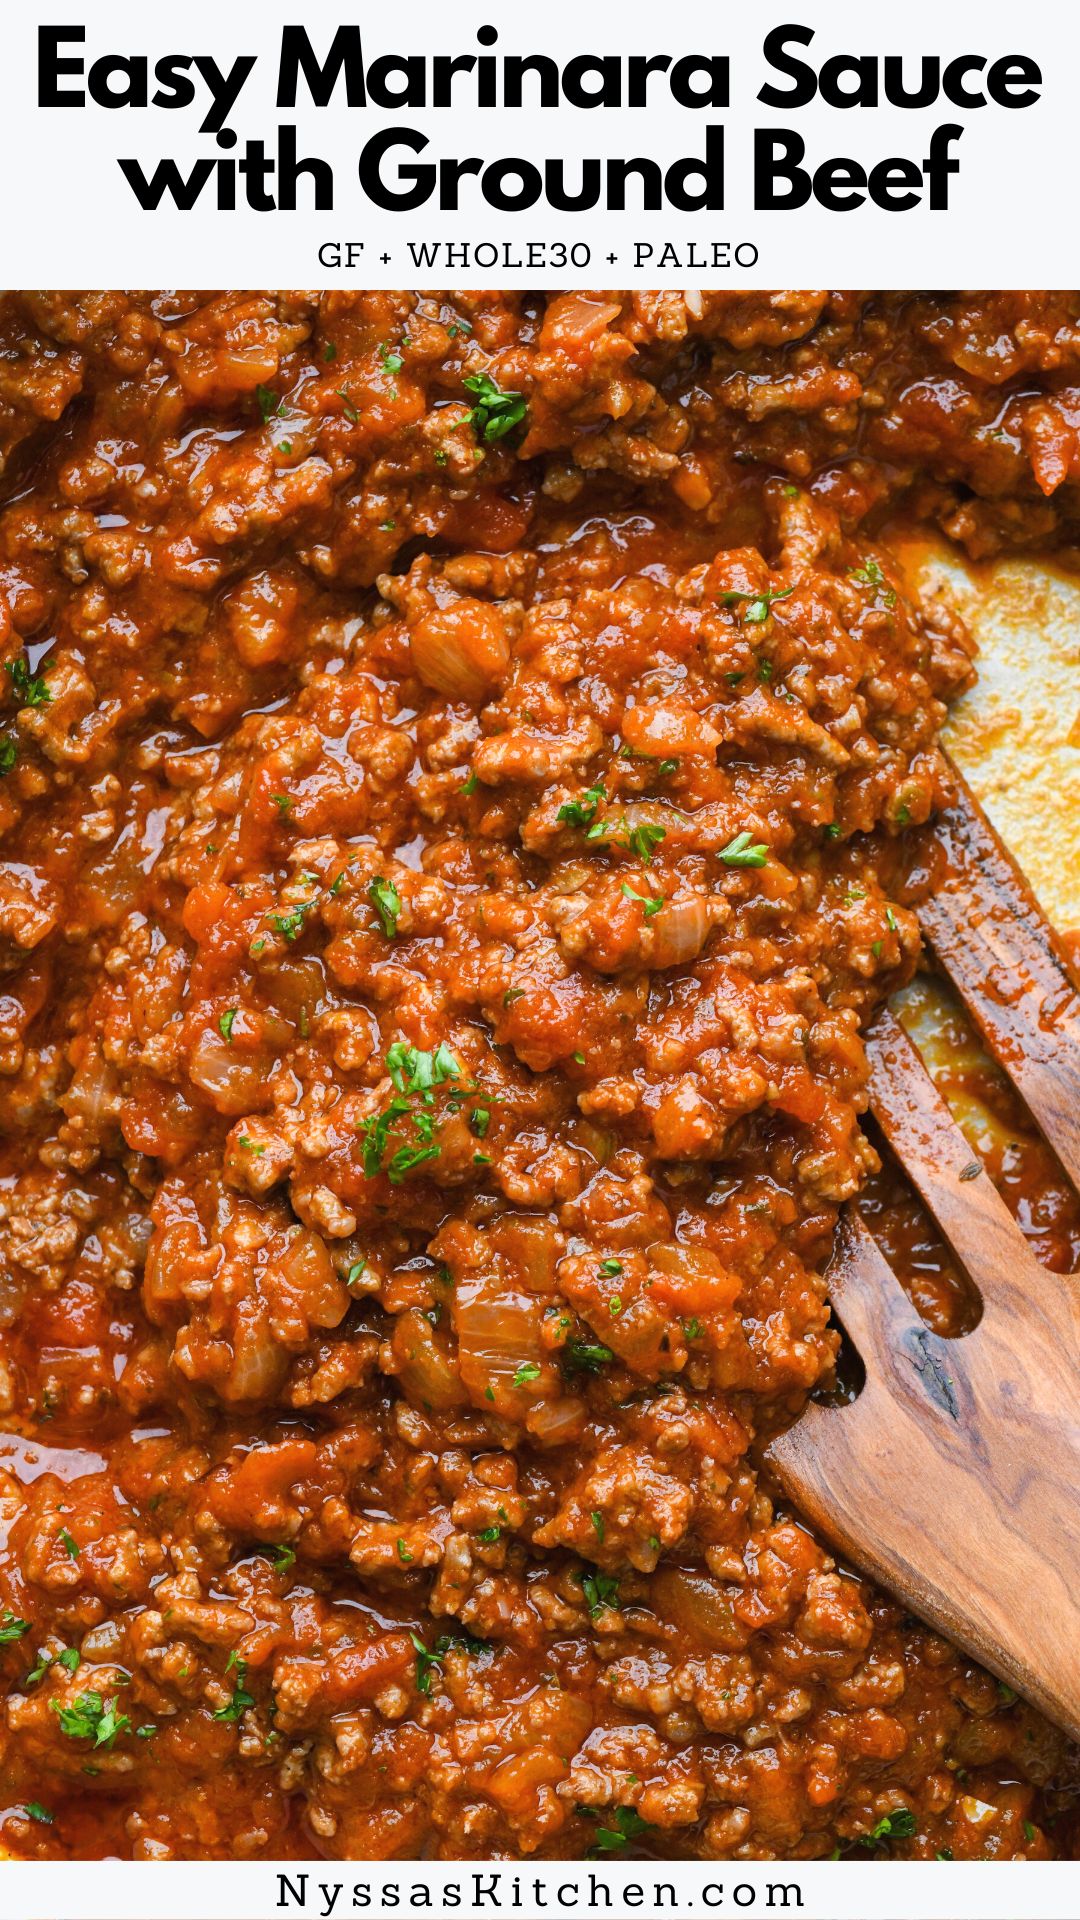 This easy marinara sauce with ground beef is a healthy, short cut version of a classic full flavored Italian meat sauce that is ready in 30 minutes flat! All the flavor with minimal effort for an easy protein rich addition to any meal. Makes enough sauce for approximately one pound of pasta. Gluten free, paleo, and whole30 compatible.